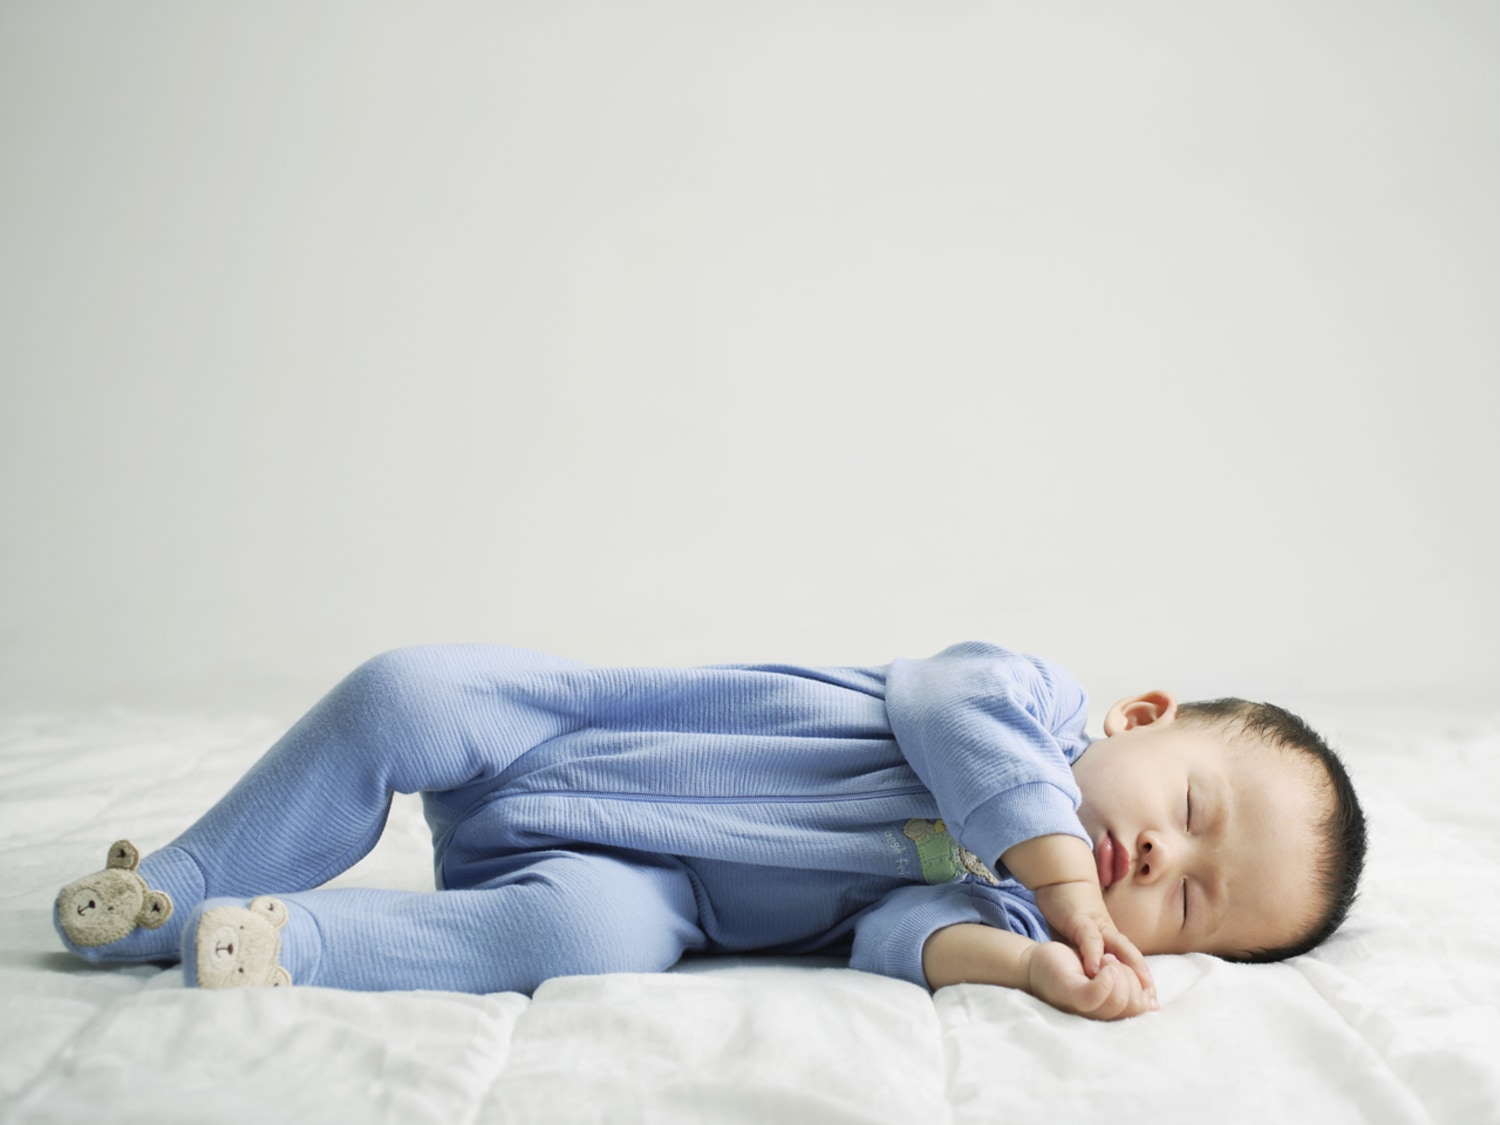 Exhausted new mom's hilarious take on 'expert' sleep advice goes viral